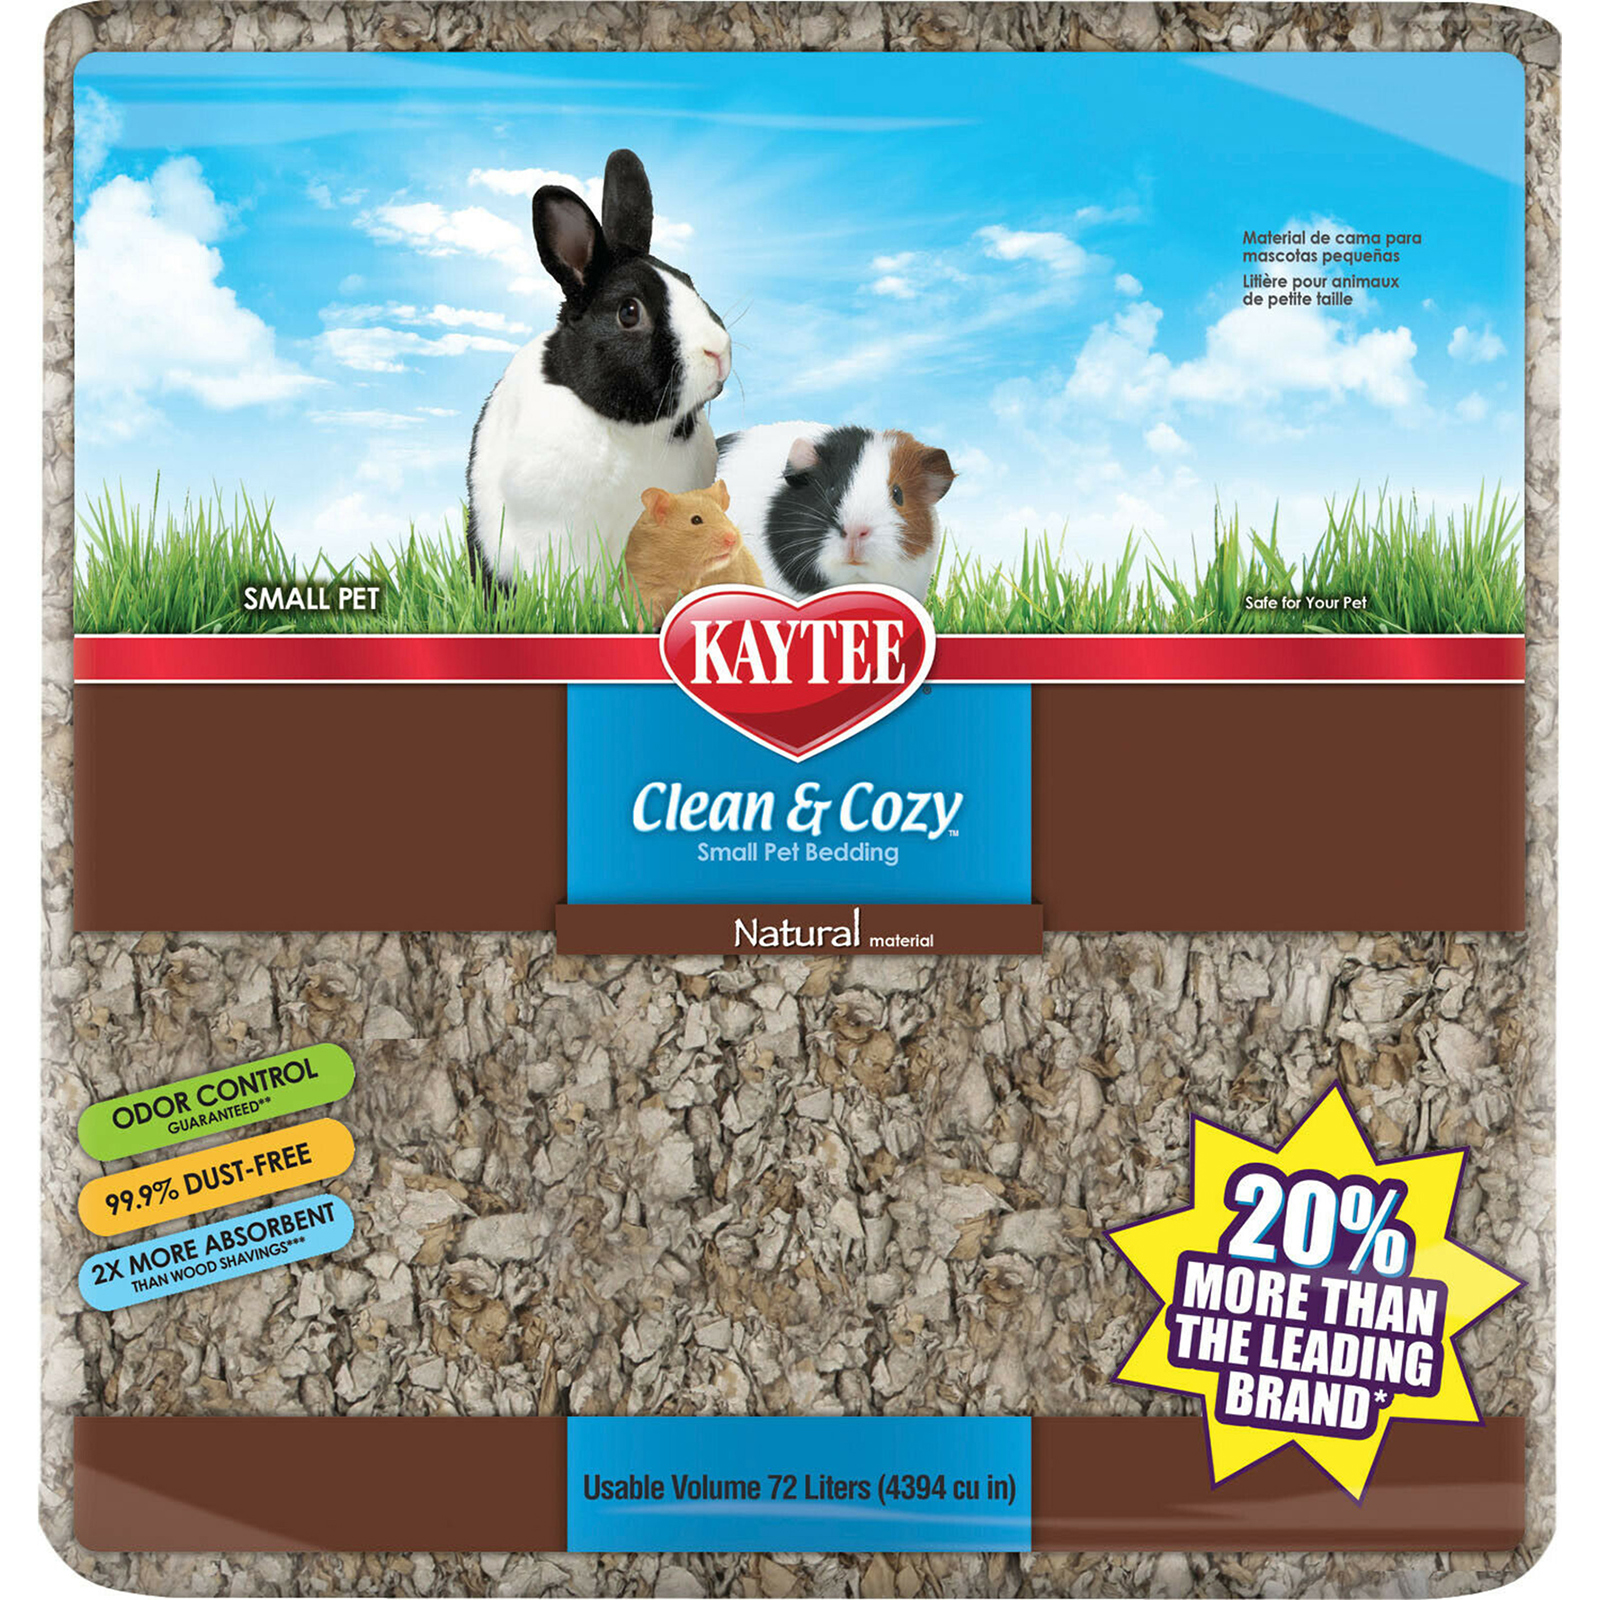 Kaytee Pet Products 38000068 Clean & Cozy 72L Small Animal Bedding-Natural